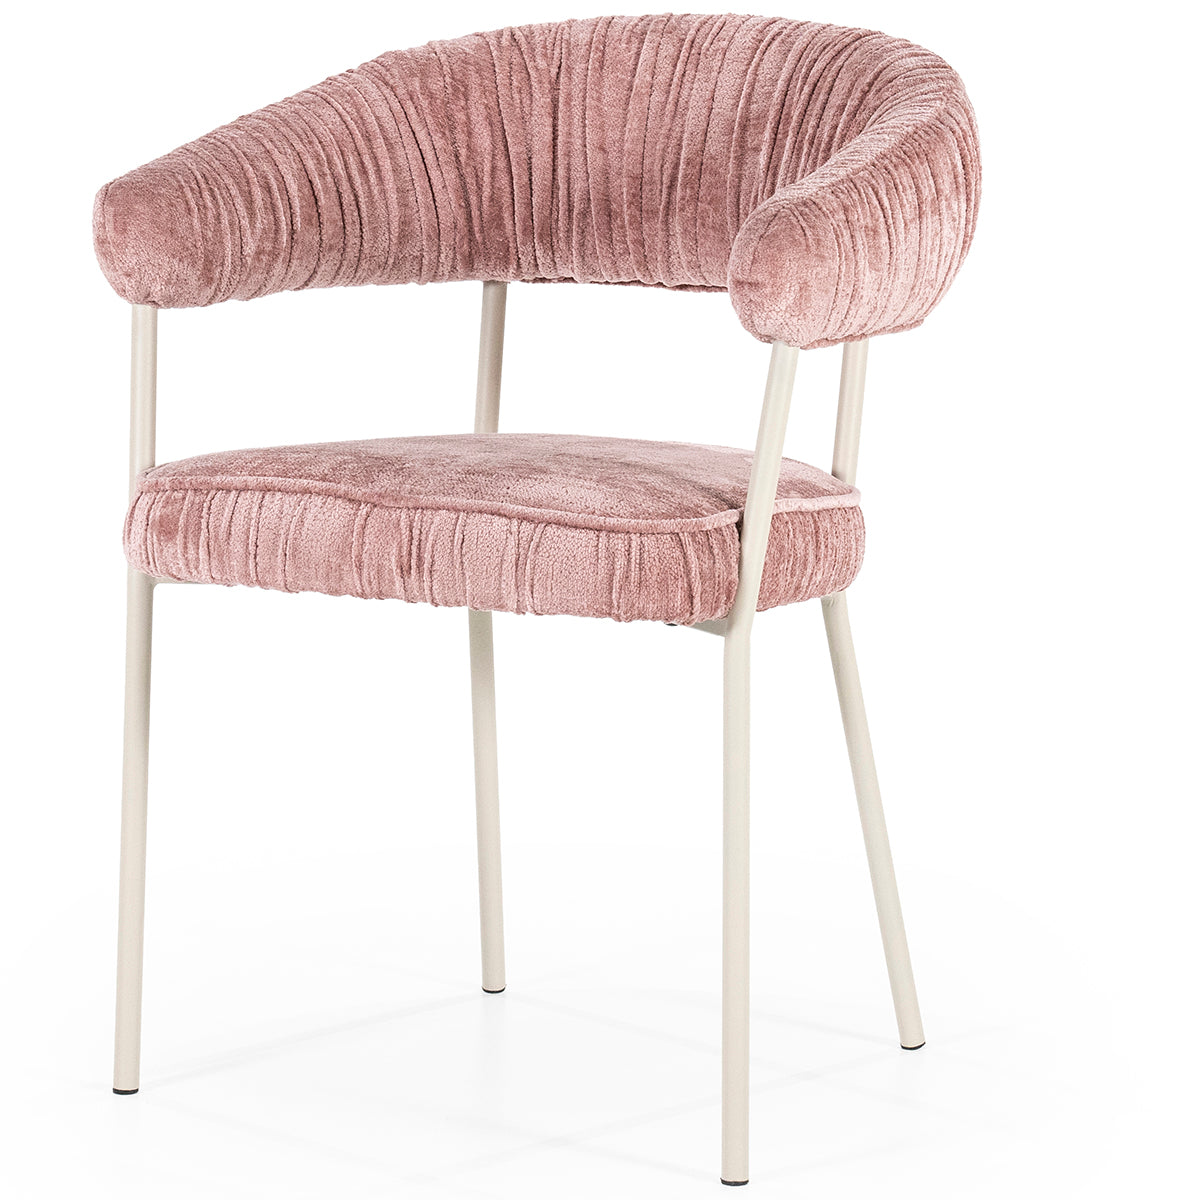 Lizzy Femme Chair